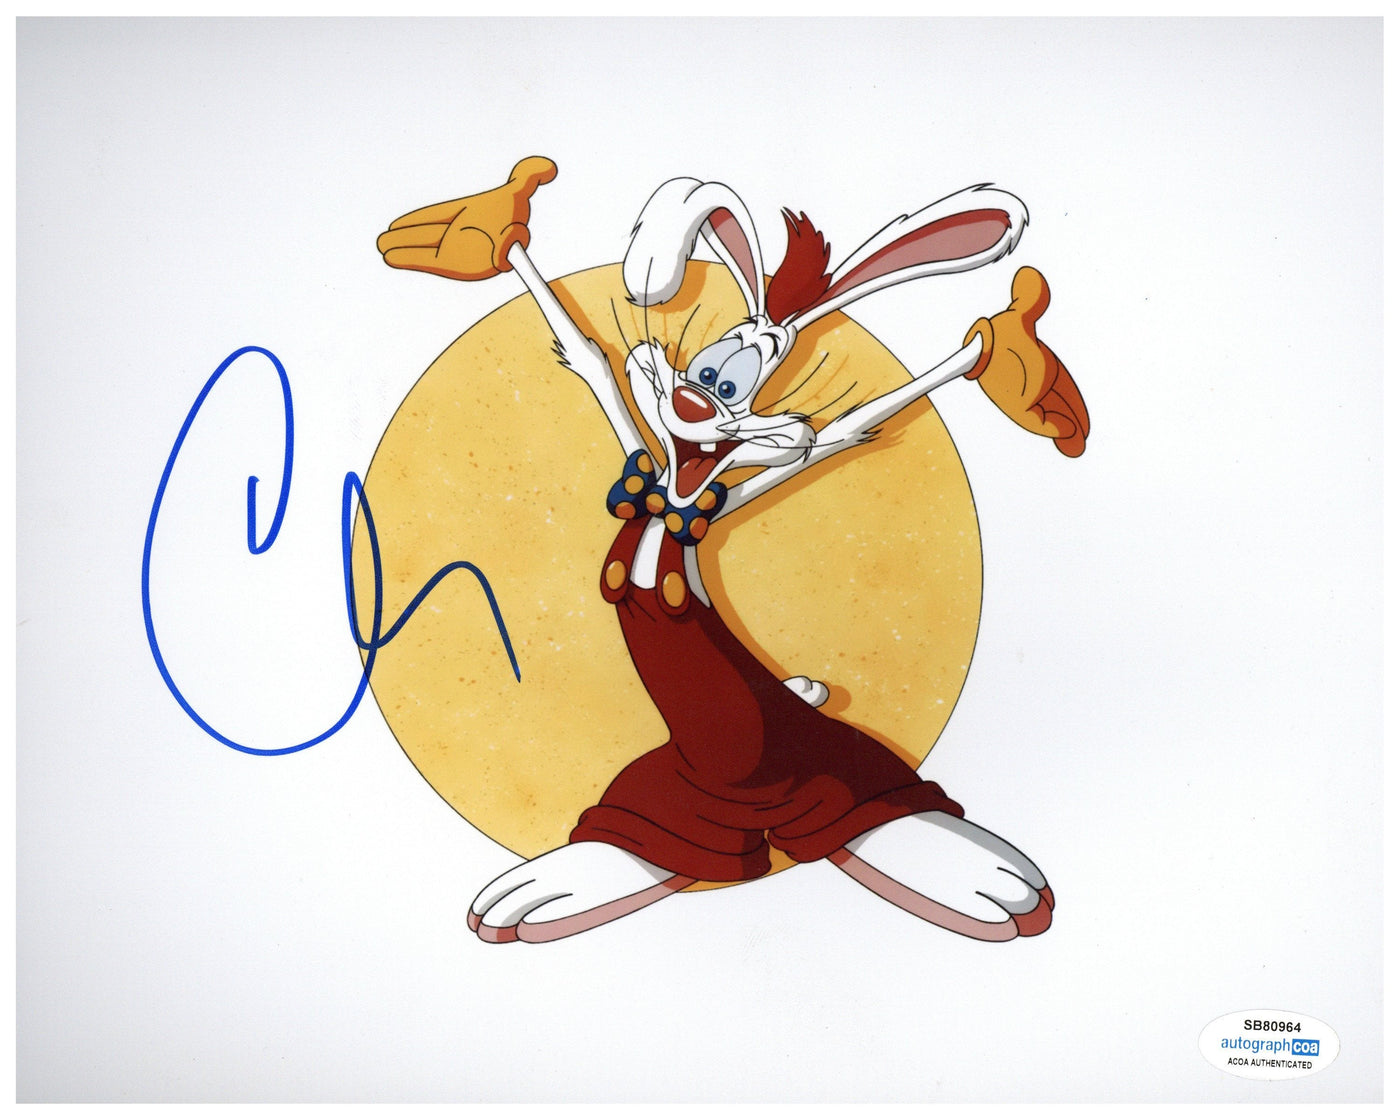 Charles Fleischer Signed 8x10 Photo Who Framed Roger Rabbit Autographed ACOA